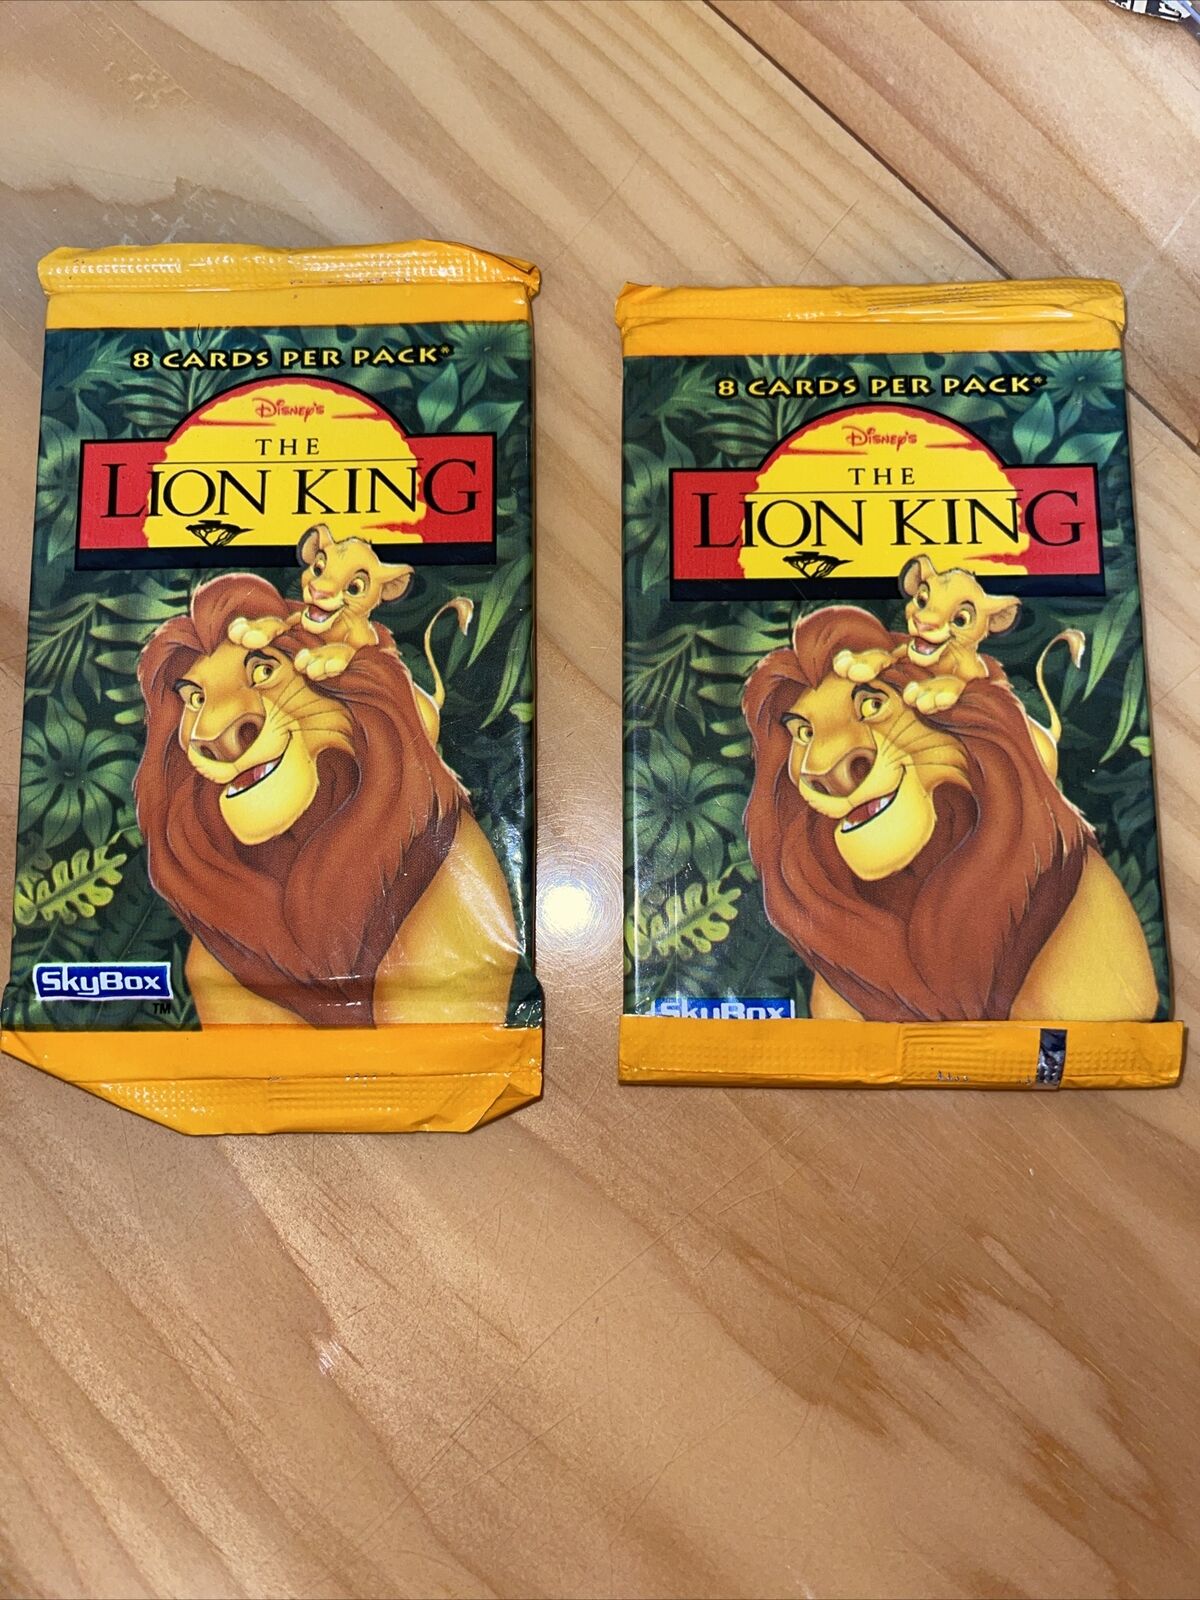 Skybox 1995 Disney Lion King (2) Packs Factory Sealed 8 Trading Cards Per Pack